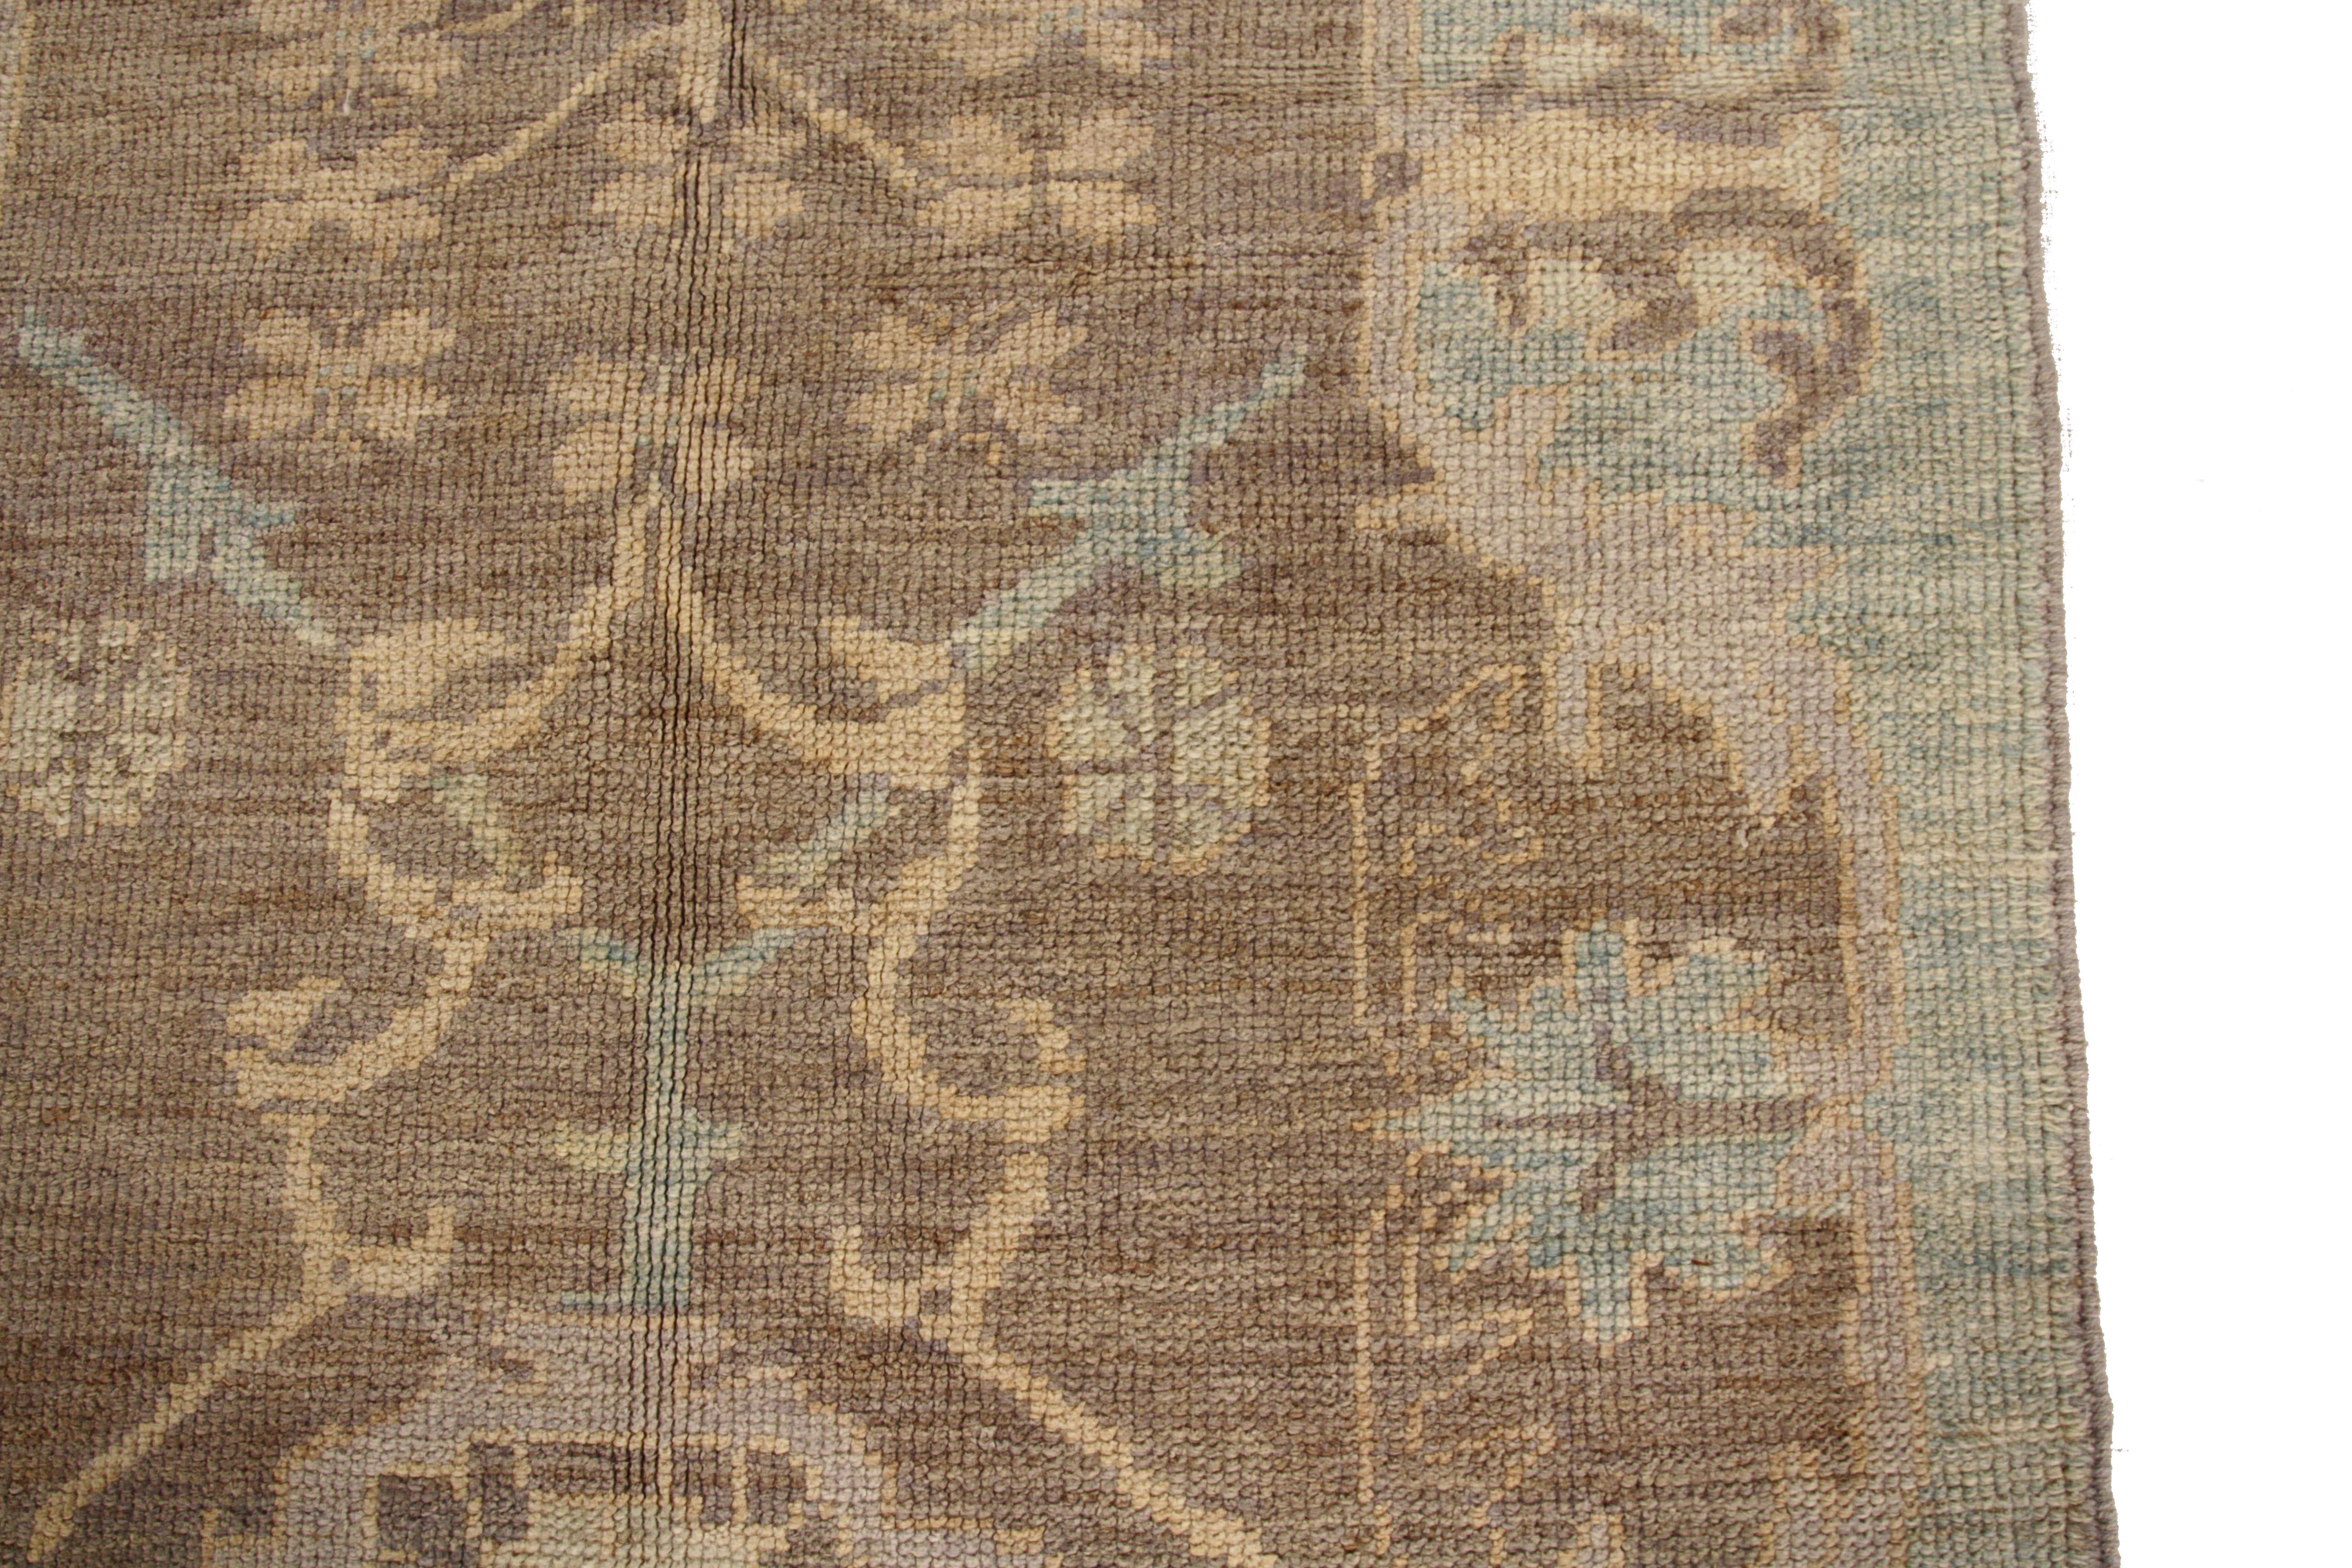 New Persian Oushak Rug with Brown and Blue Floral Design Patterns In New Condition For Sale In Dallas, TX